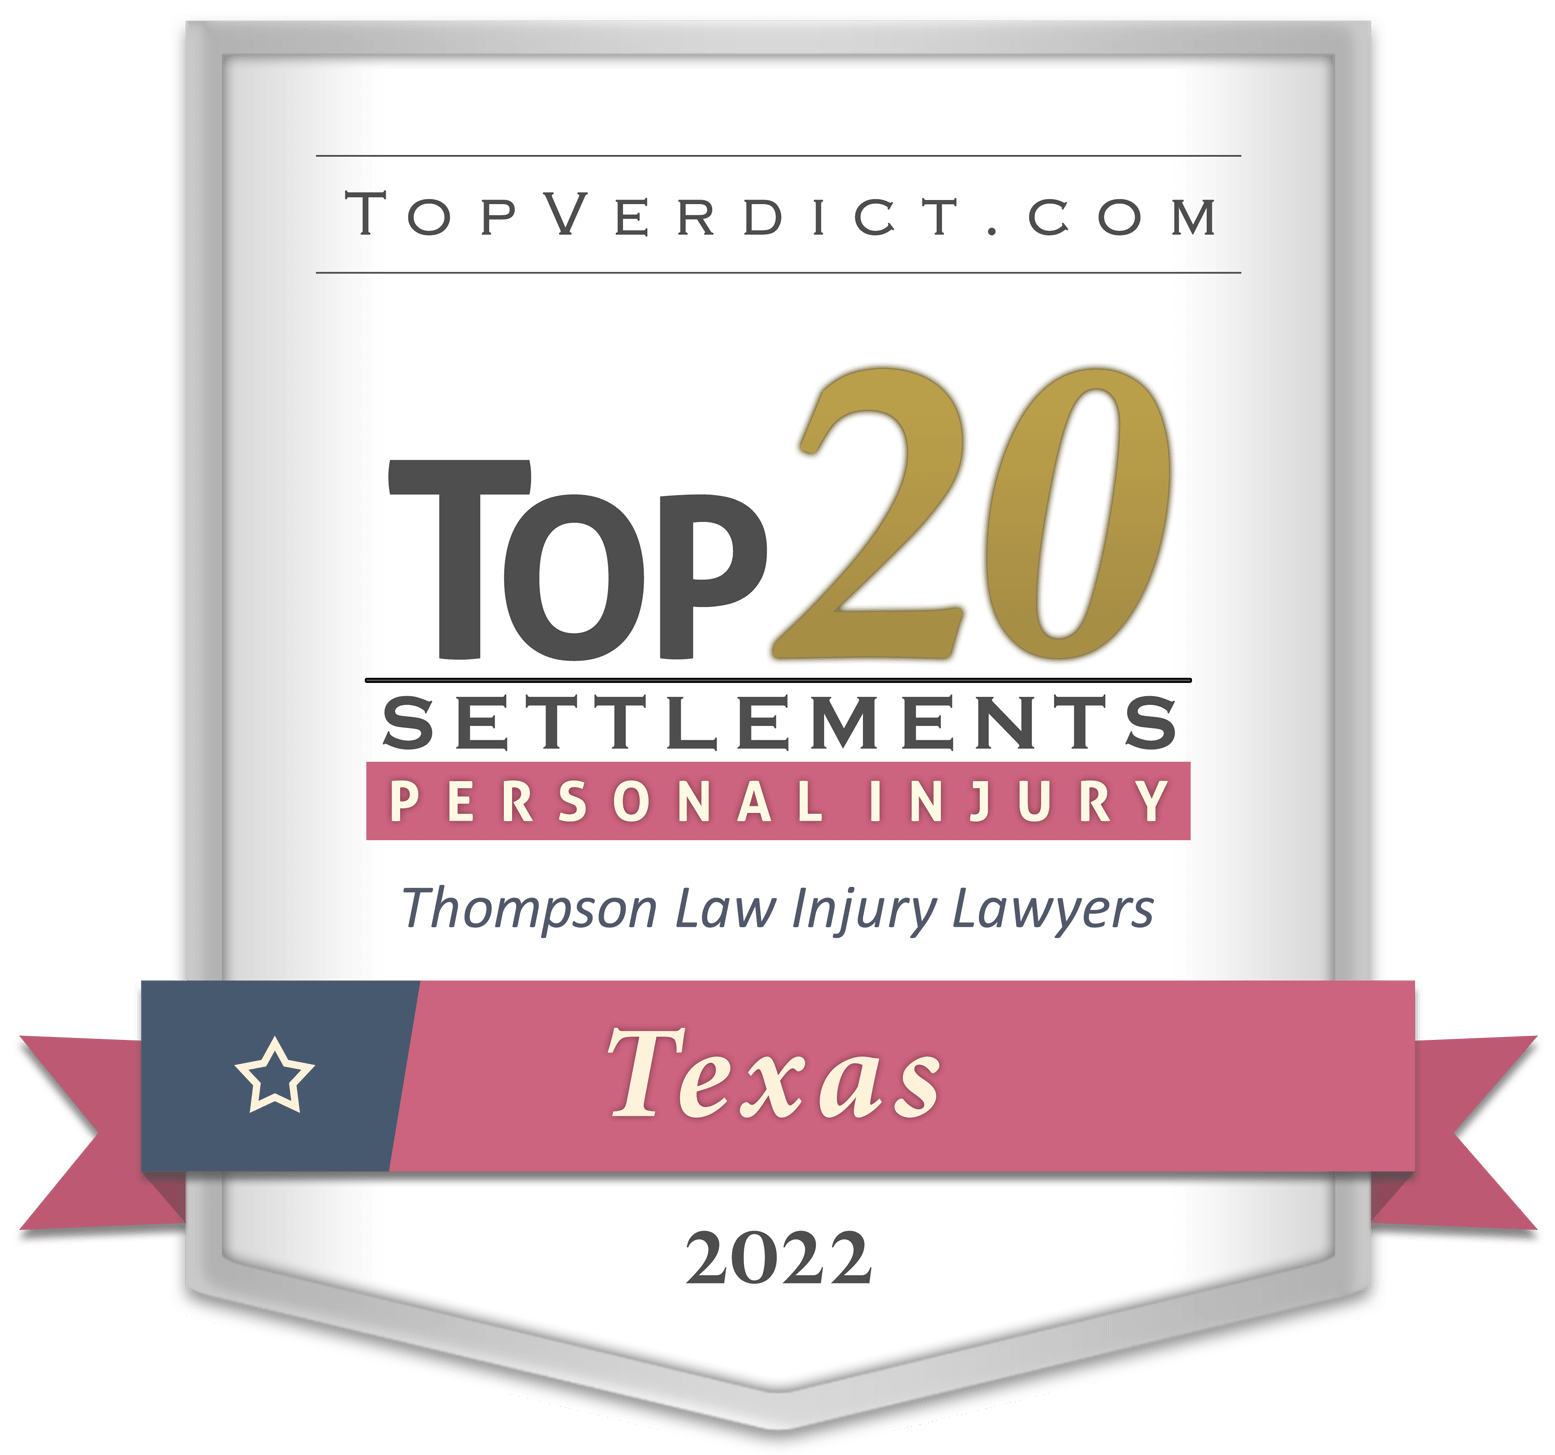 TopVerdict Top 20 personal injury settlements in Texas 2022 badge - College Station Personal Injury Law Firm